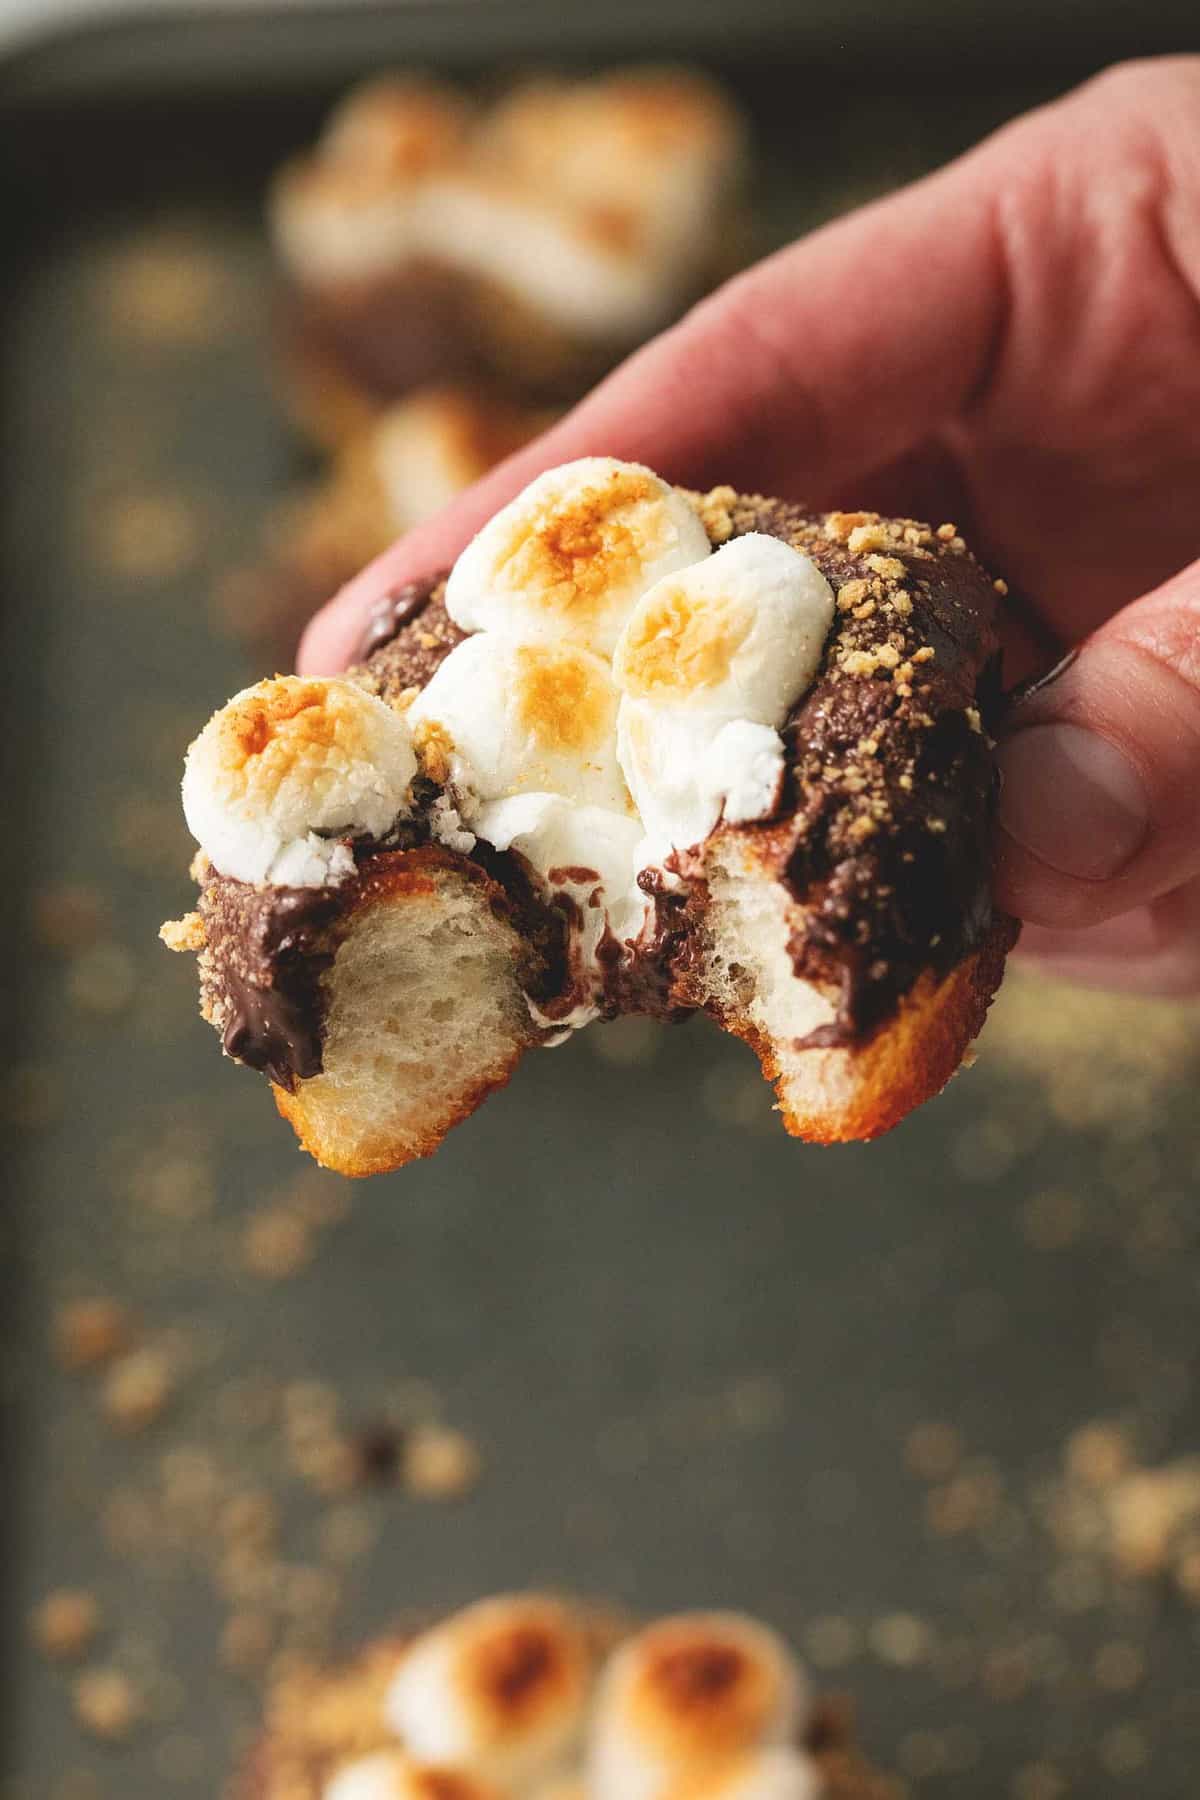 a hand holding up a s'mores donuts with a bite missing.